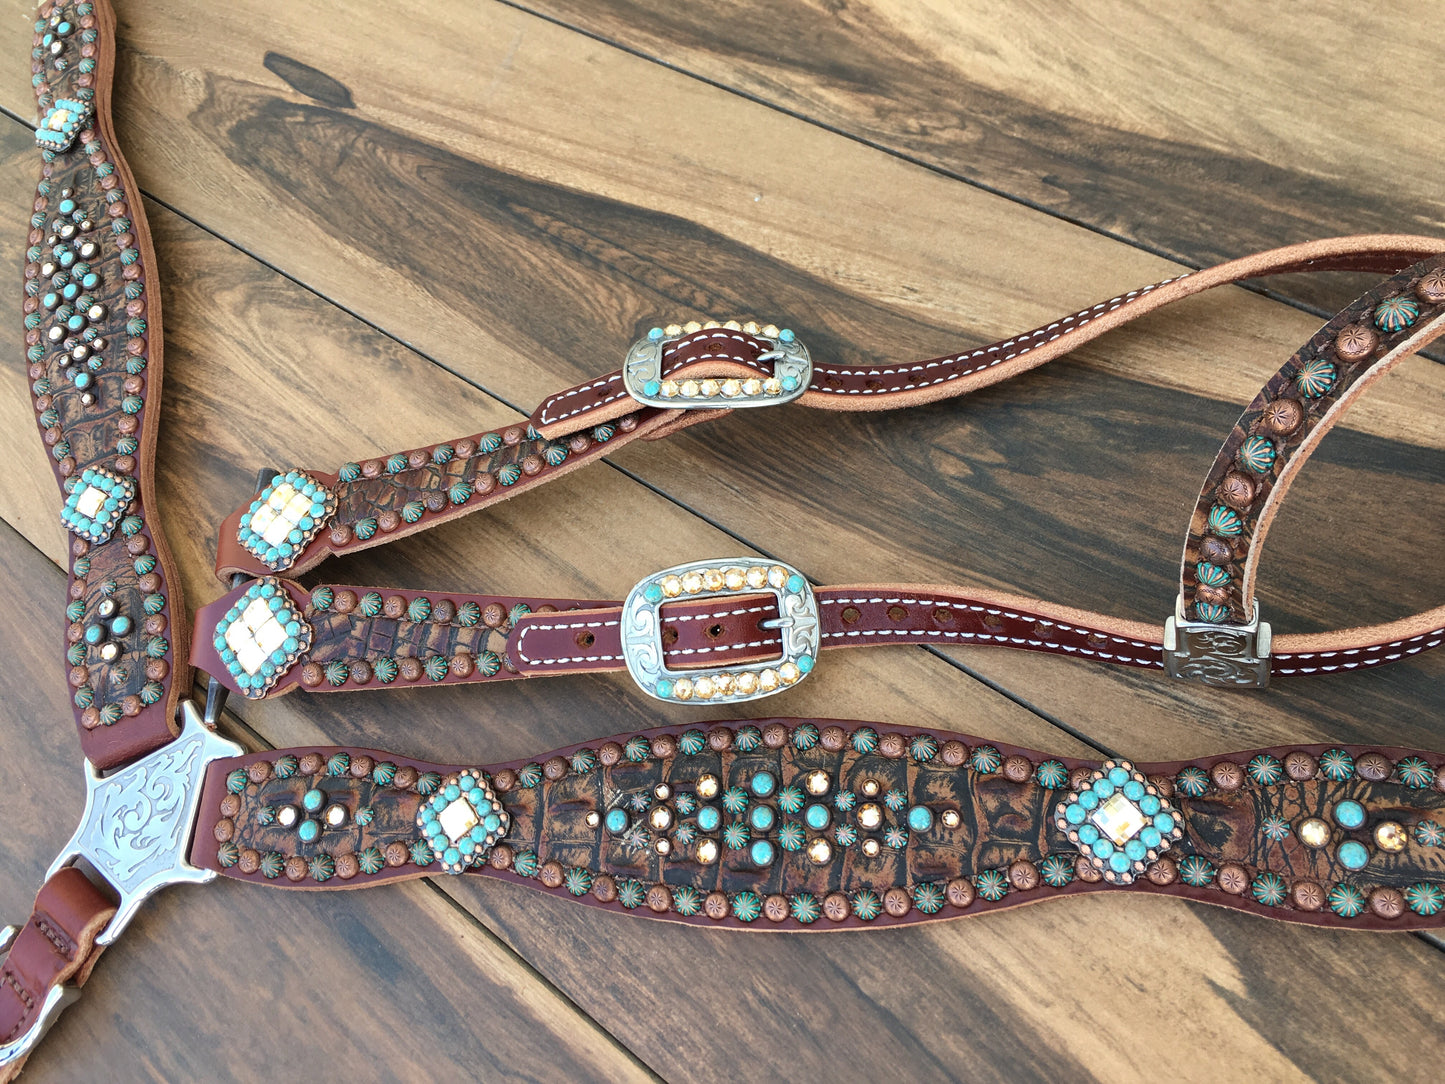 Rustic Brown Gator with Patina and Turquoise accents